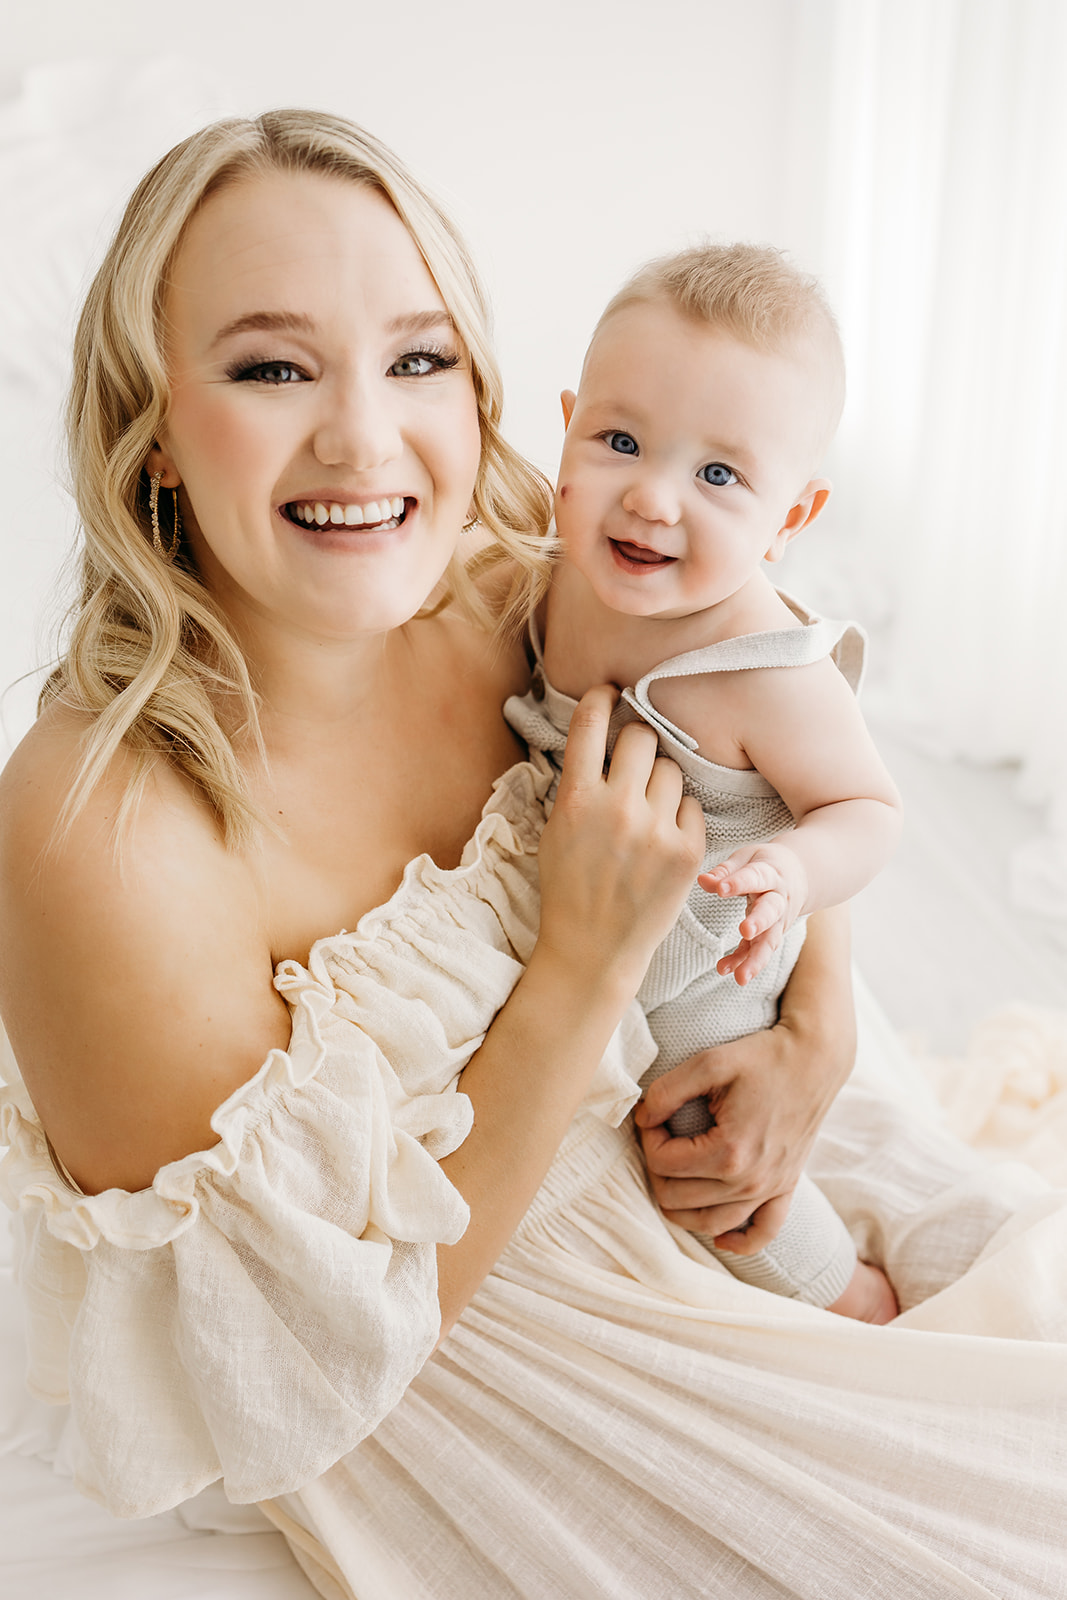 A new mother in a white dress laughs with her infant son in her arms while sitting in a studio